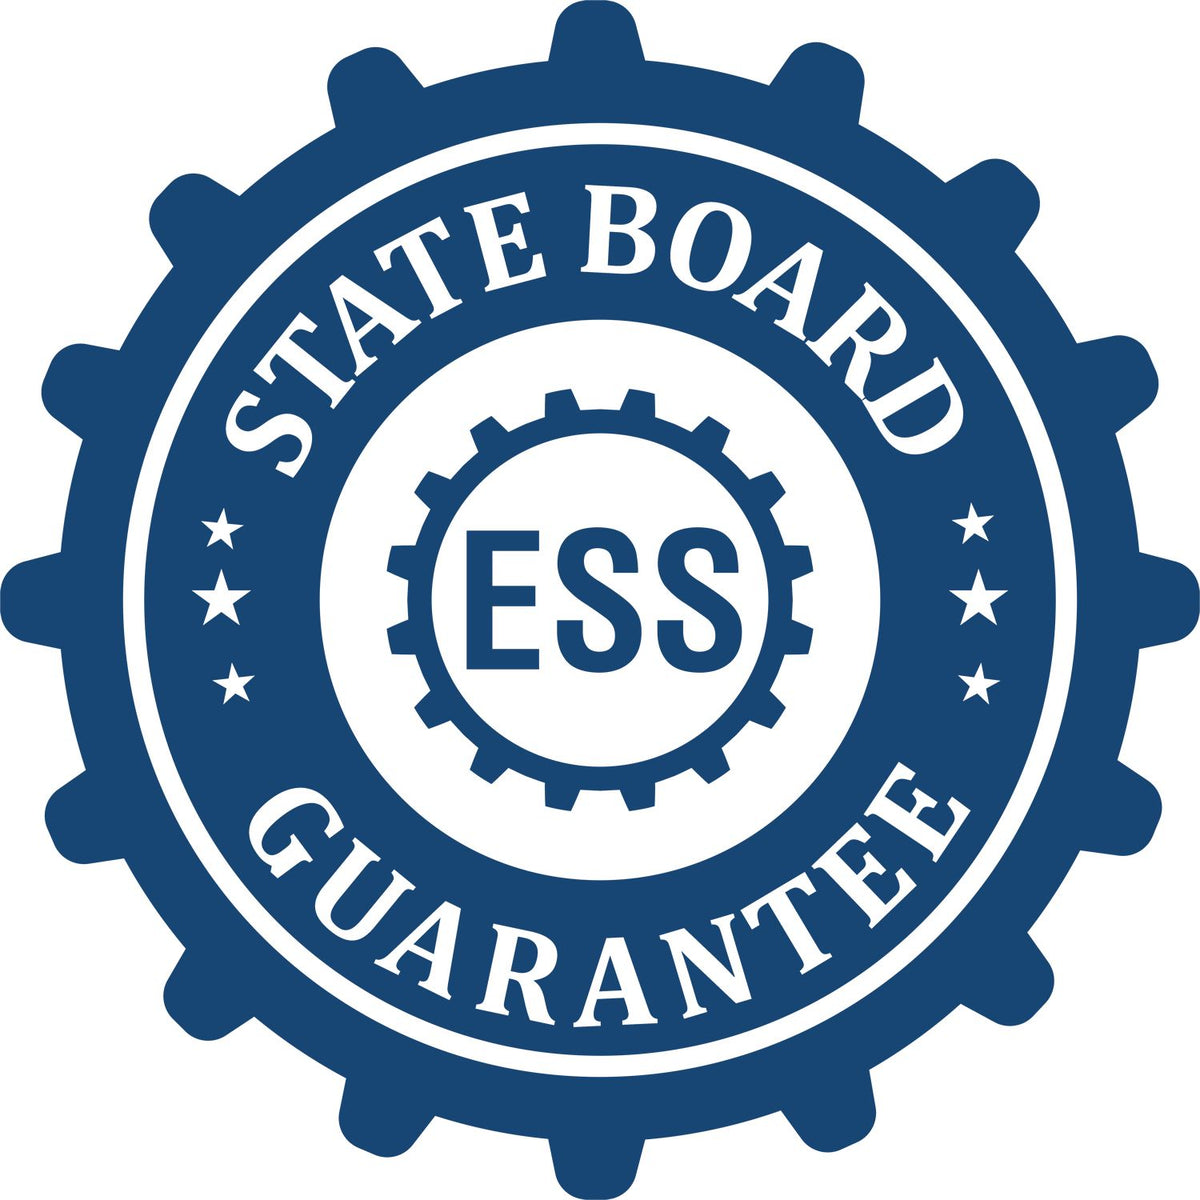 An emblem in a gear shape illustrating a state board guarantee for the State of Guam Extended Long Reach Geologist Seal